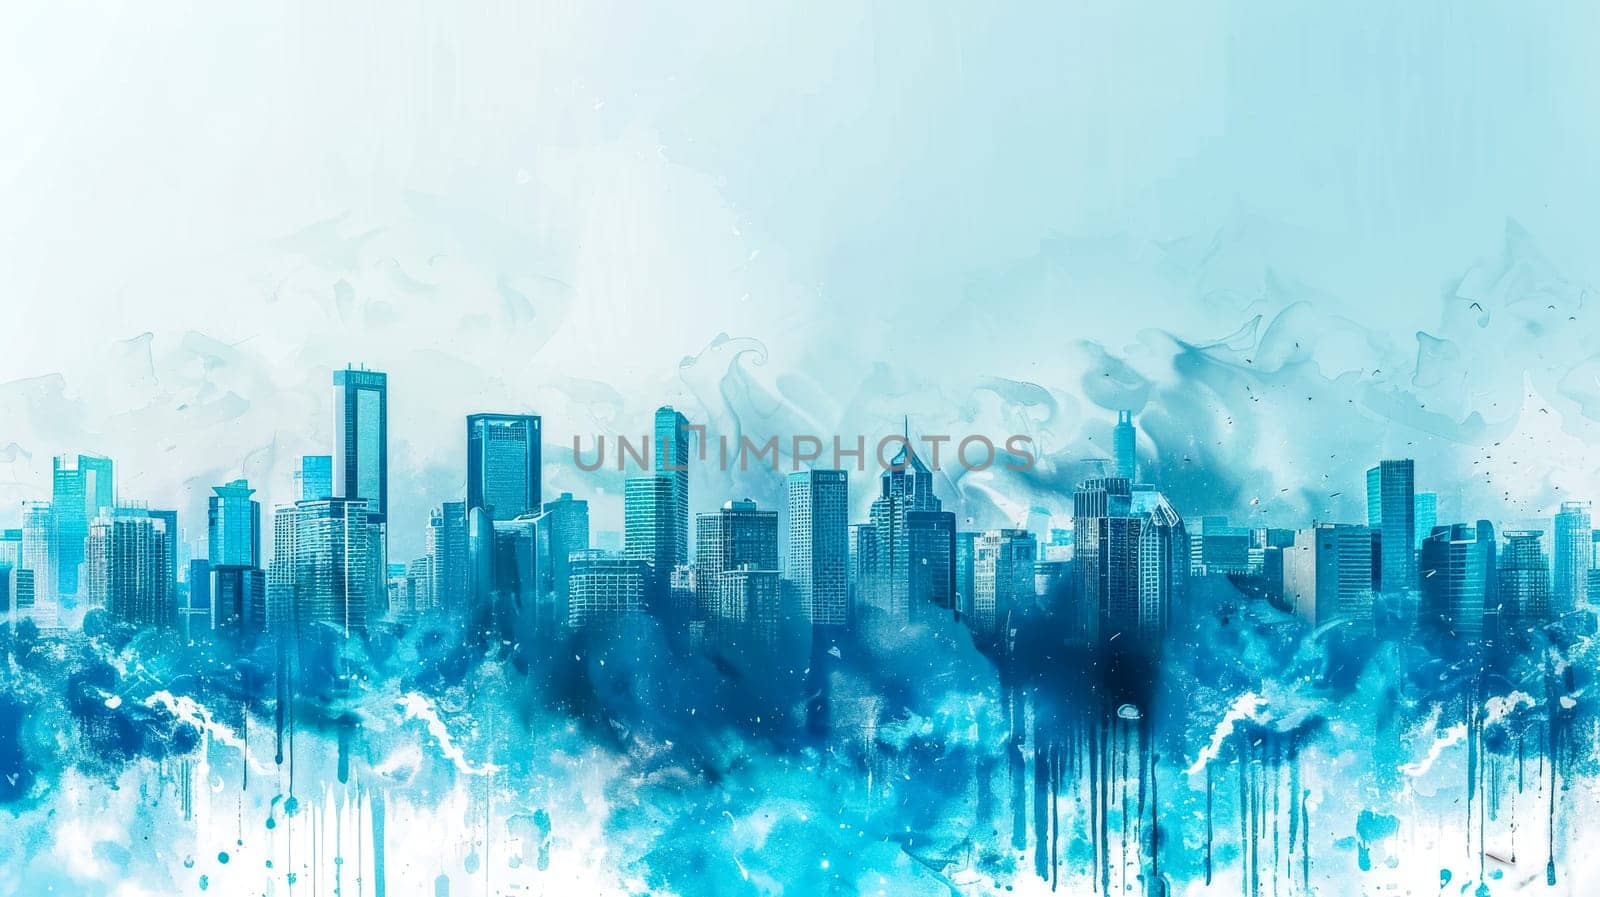 Abstract cityscape in blue watercolor by Edophoto